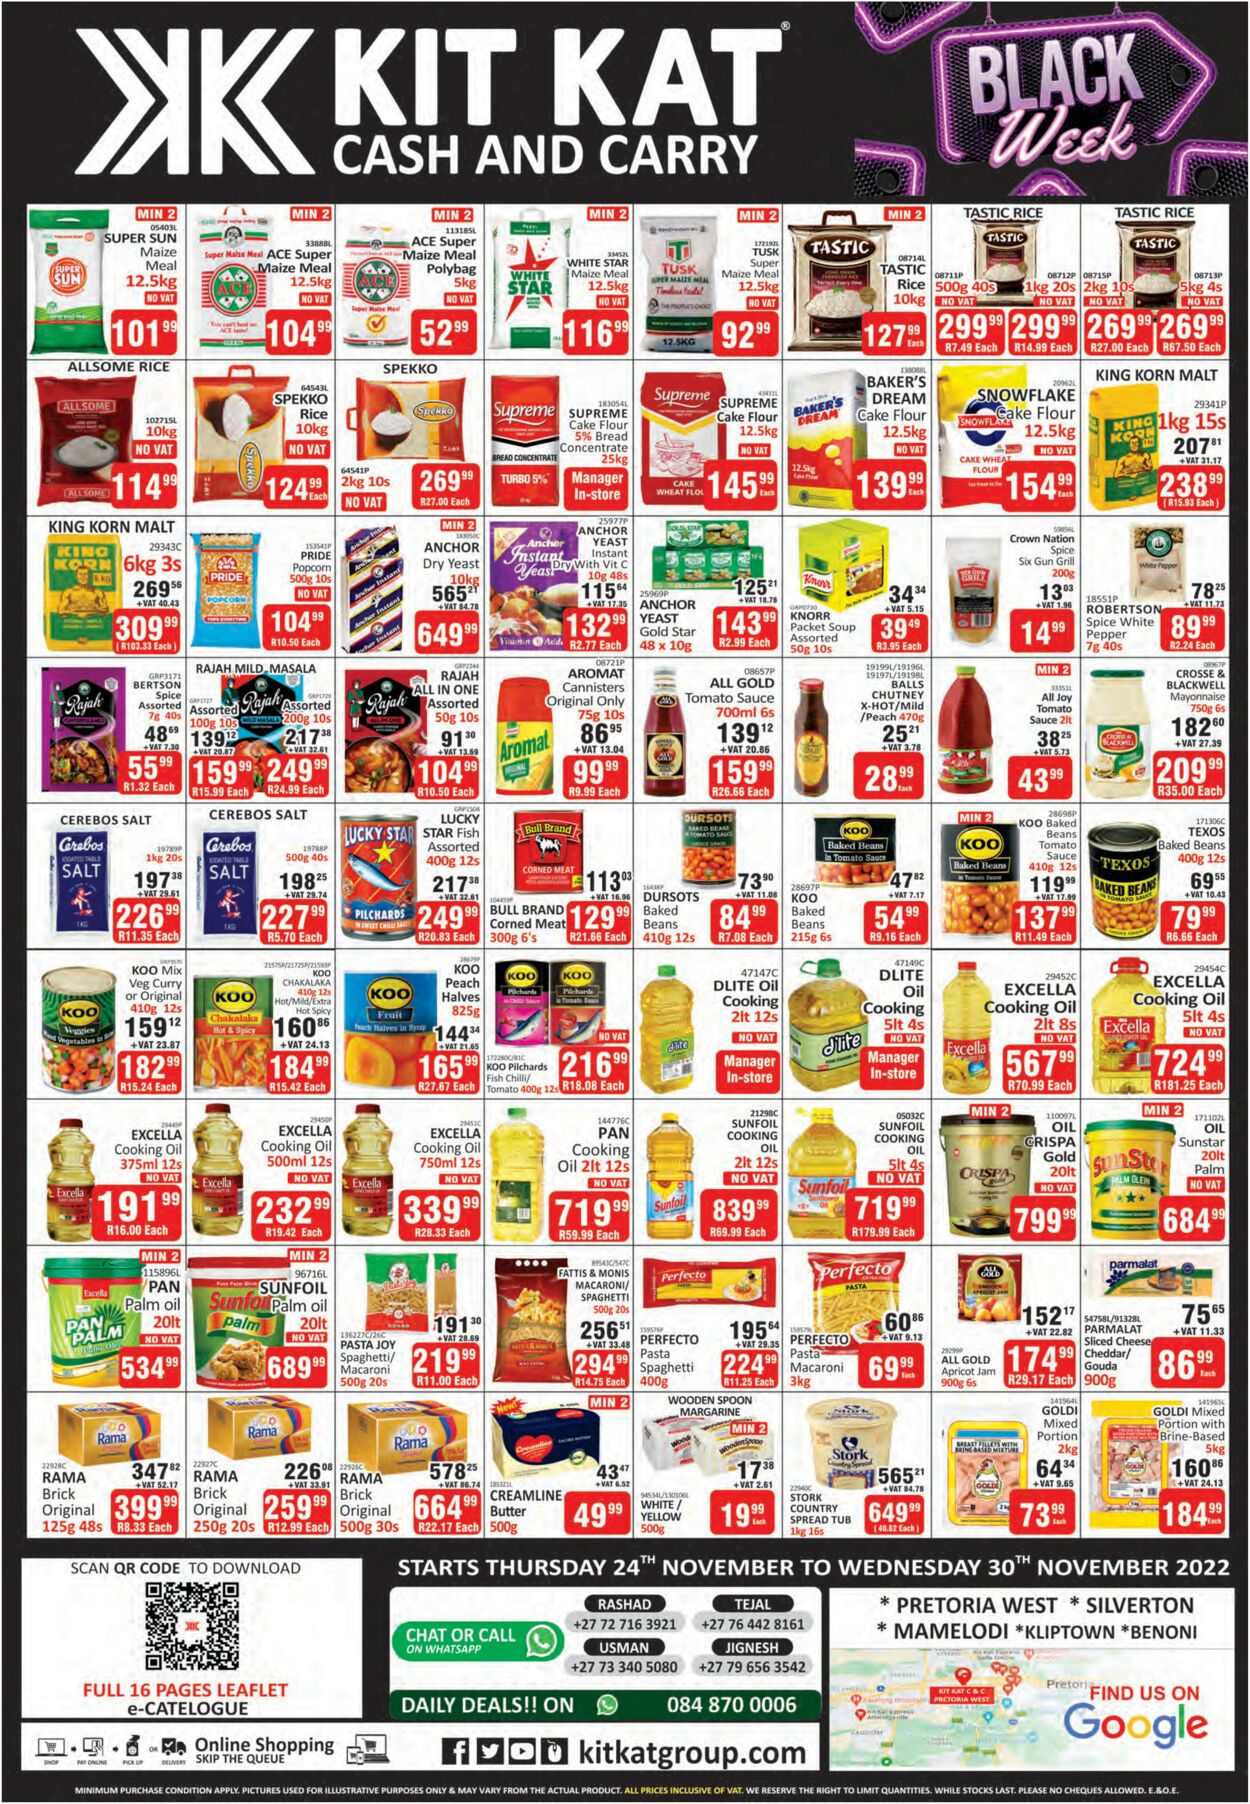 Kit Kat Cash and Carry Promotional specials